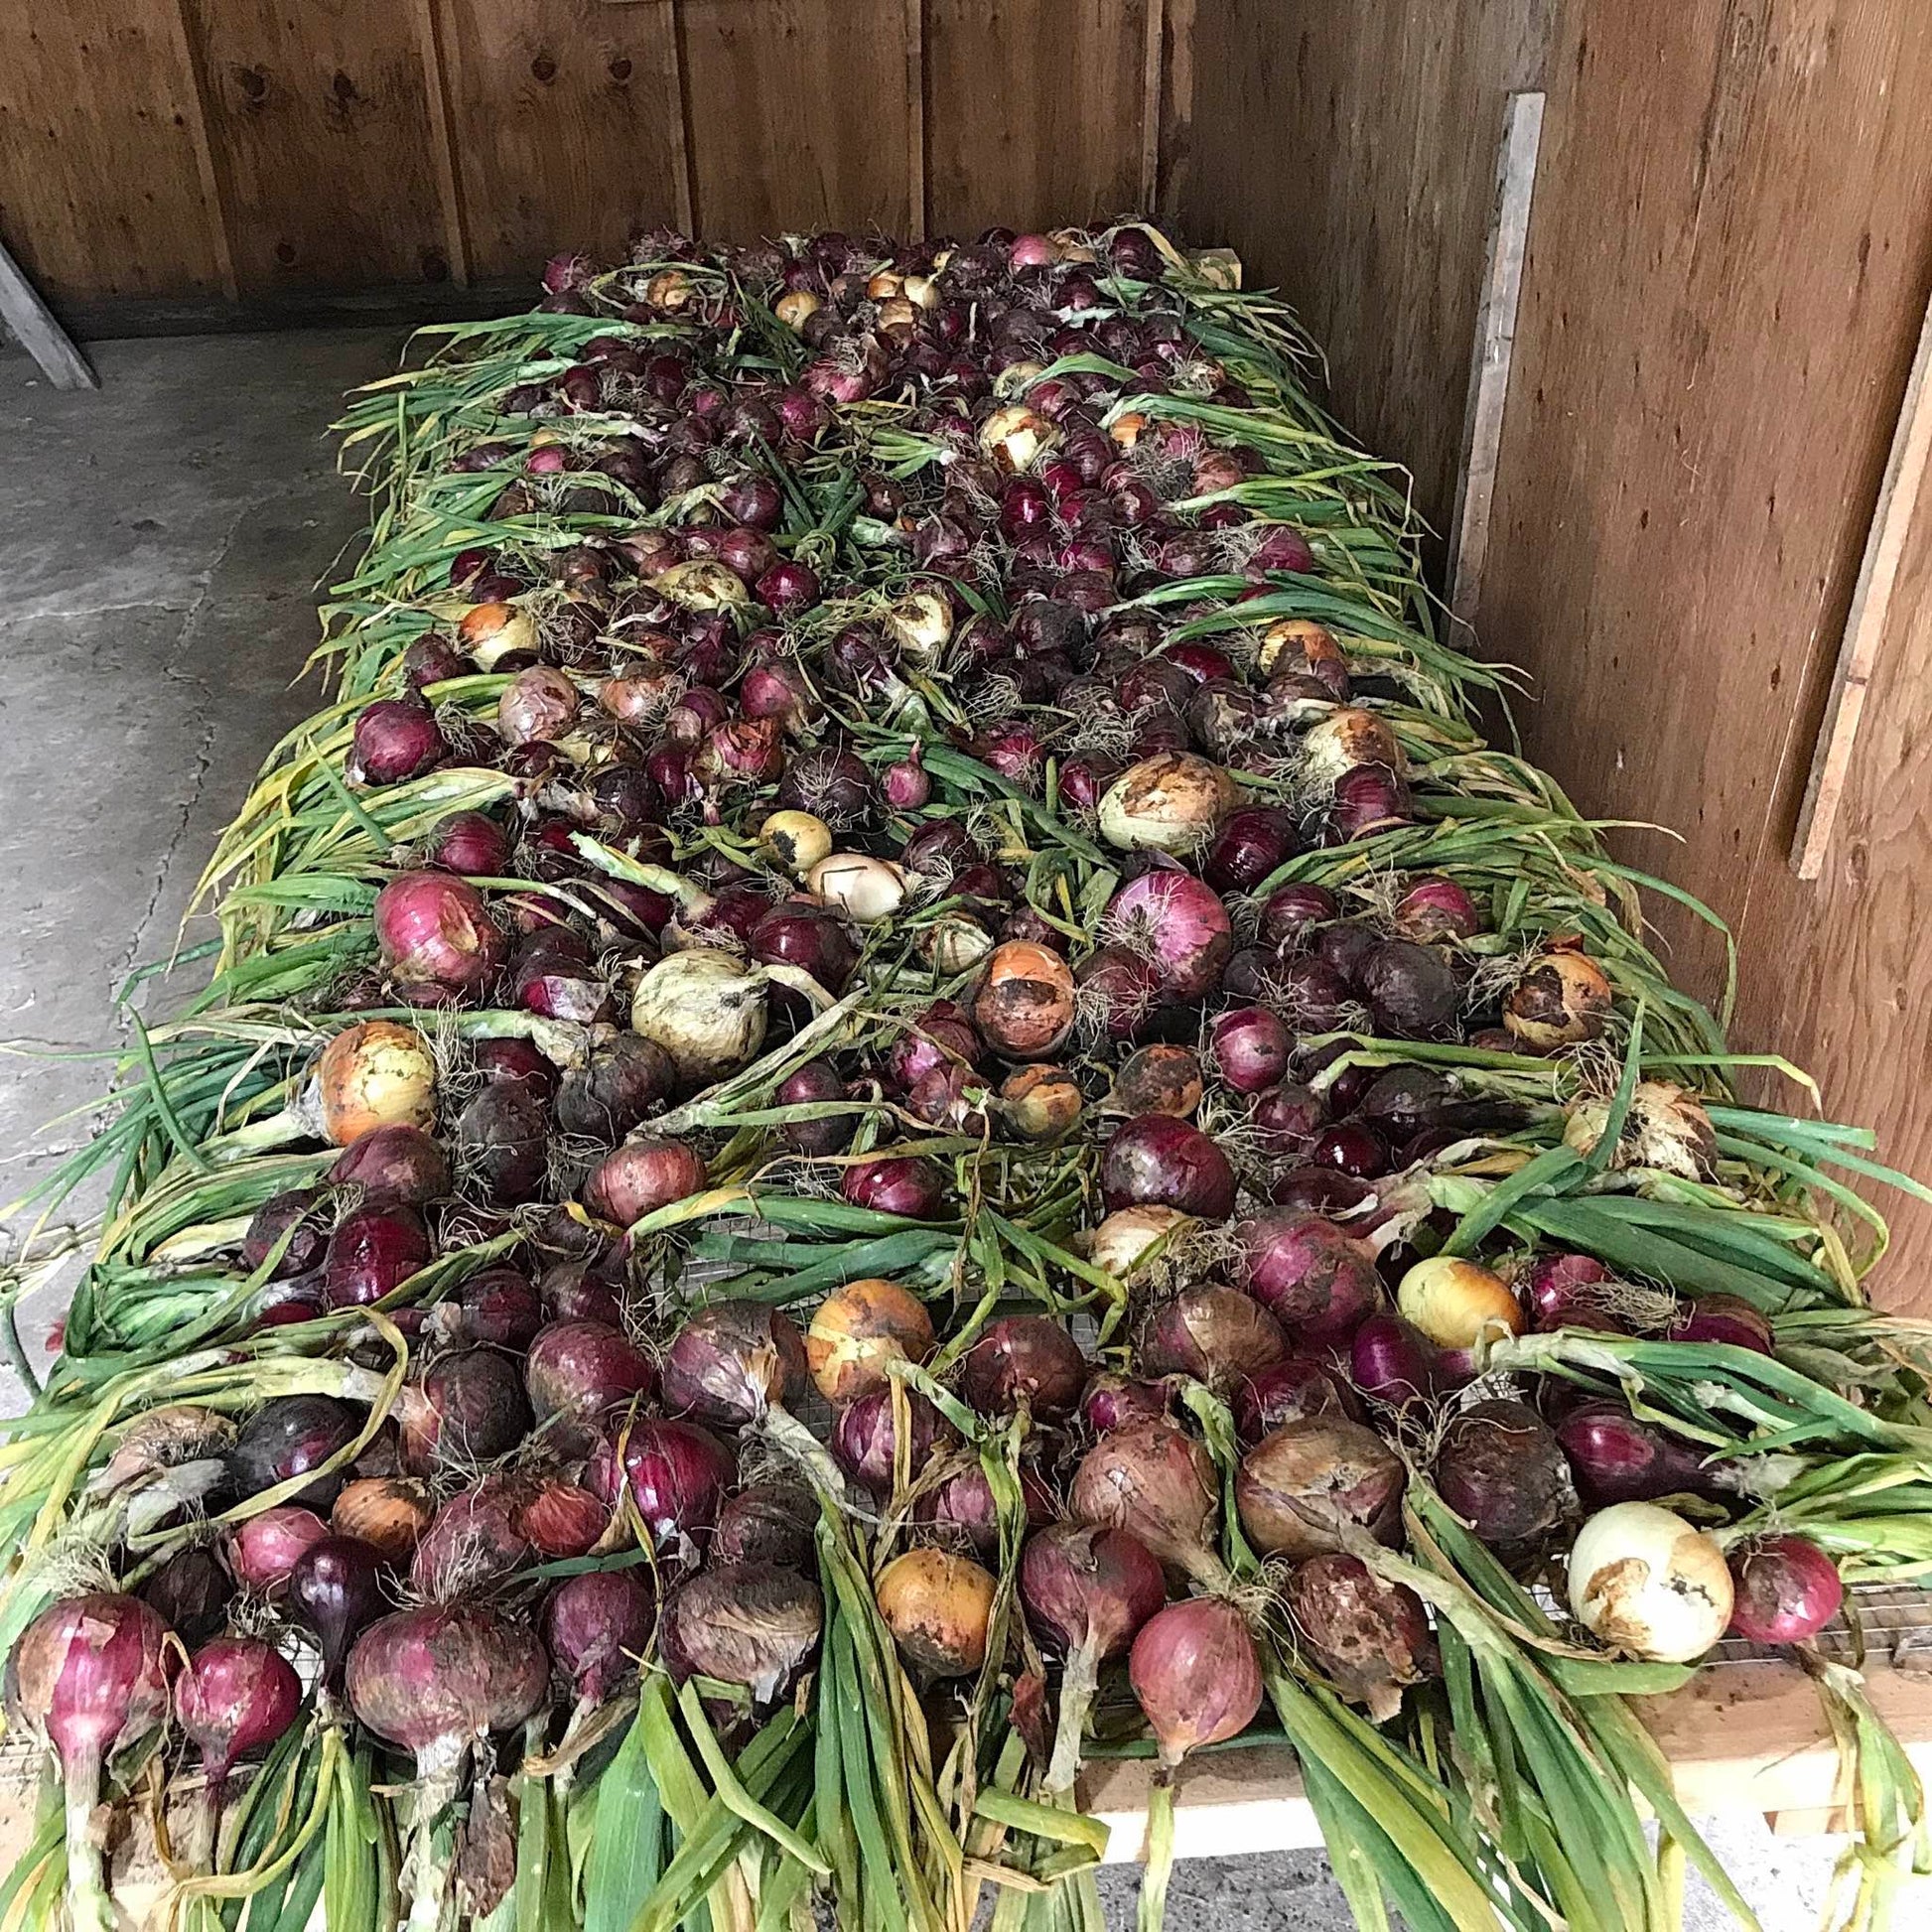 Red, pink, and yellow onions with their tops still on laid out on a table to cure.